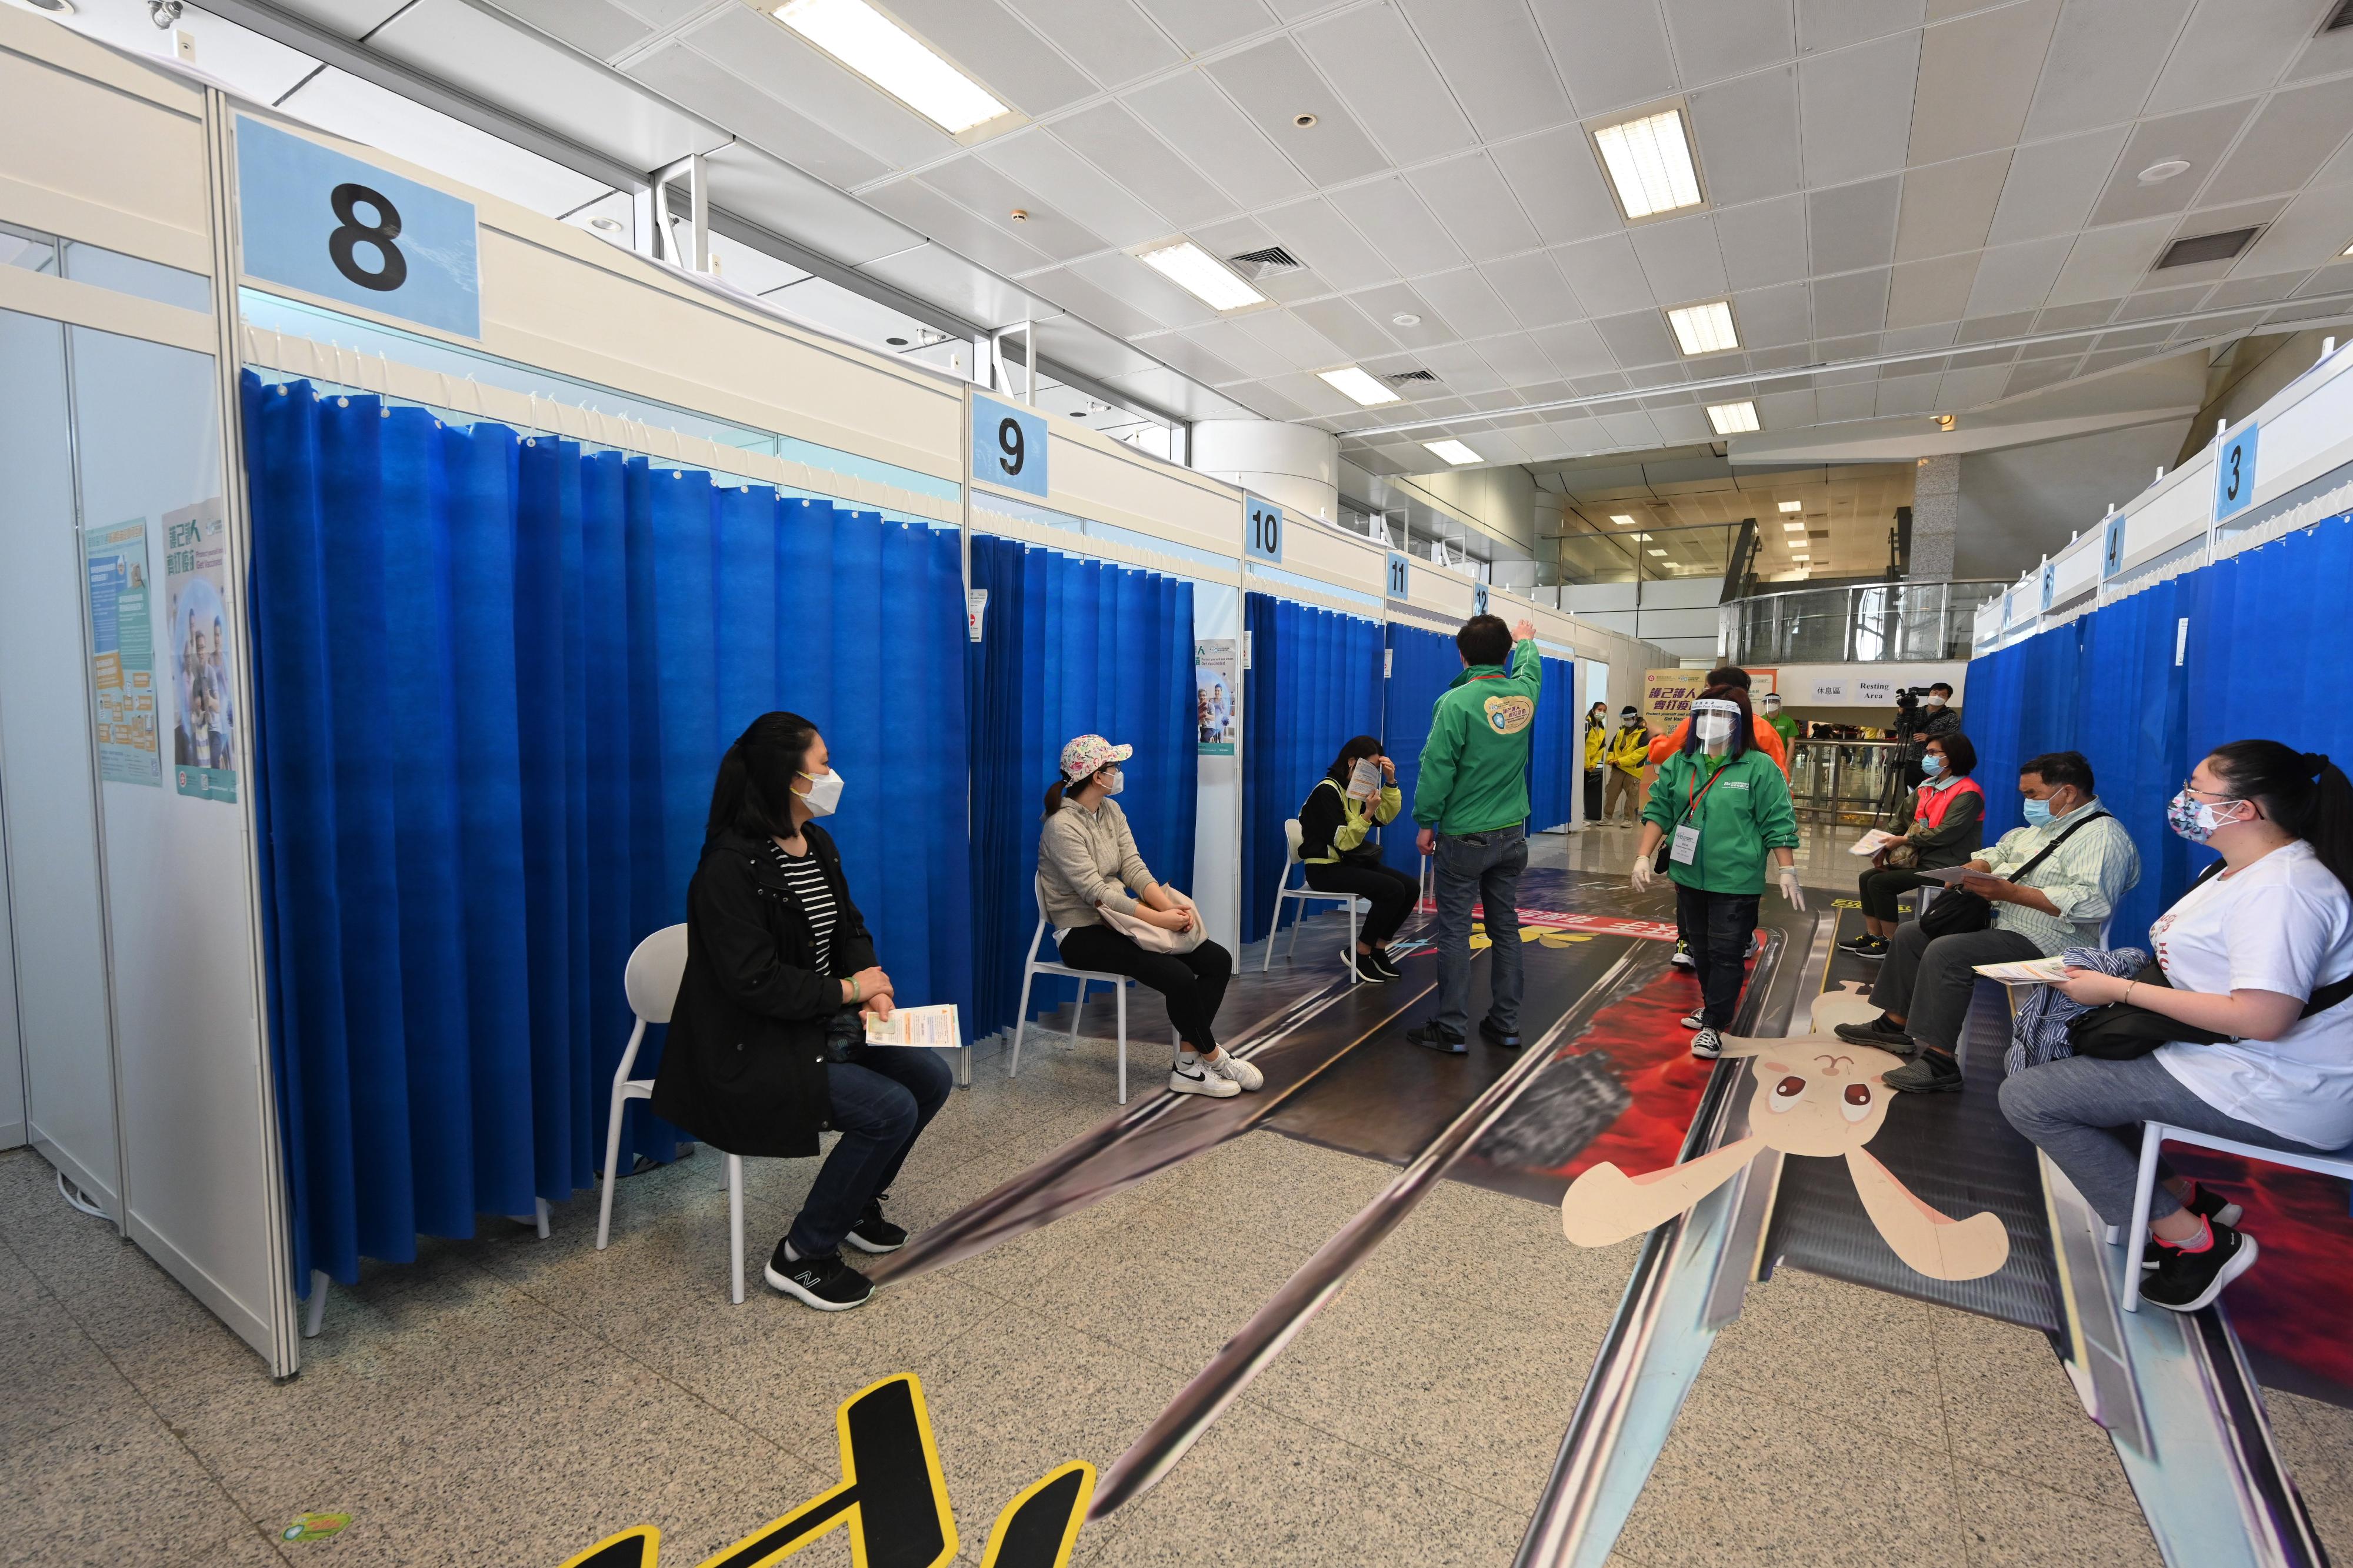 The MTR Tsing Yi Station Community Vaccination Centre (CVC) commenced operation yesterday (March 11) to provide Sinovac vaccination service to people aged 3 or above. Photos shows members of the public waiting to get vaccinated at the CVC.